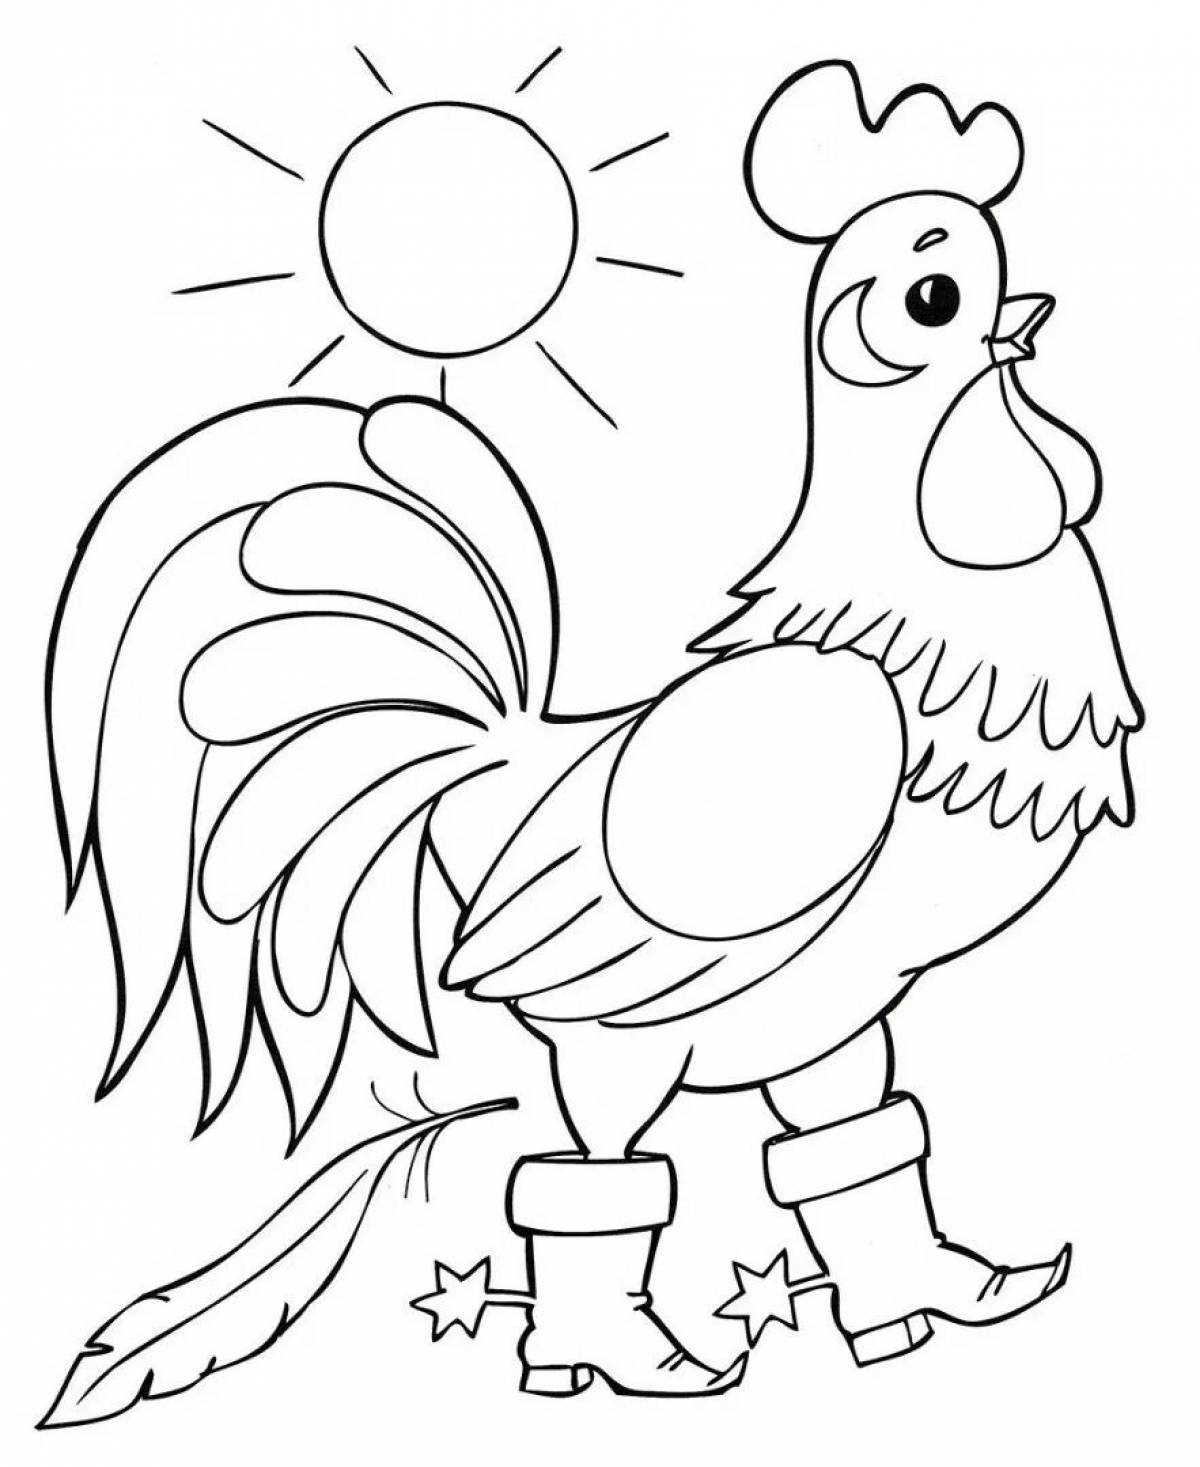 Coloring cock for children 4-5 years old